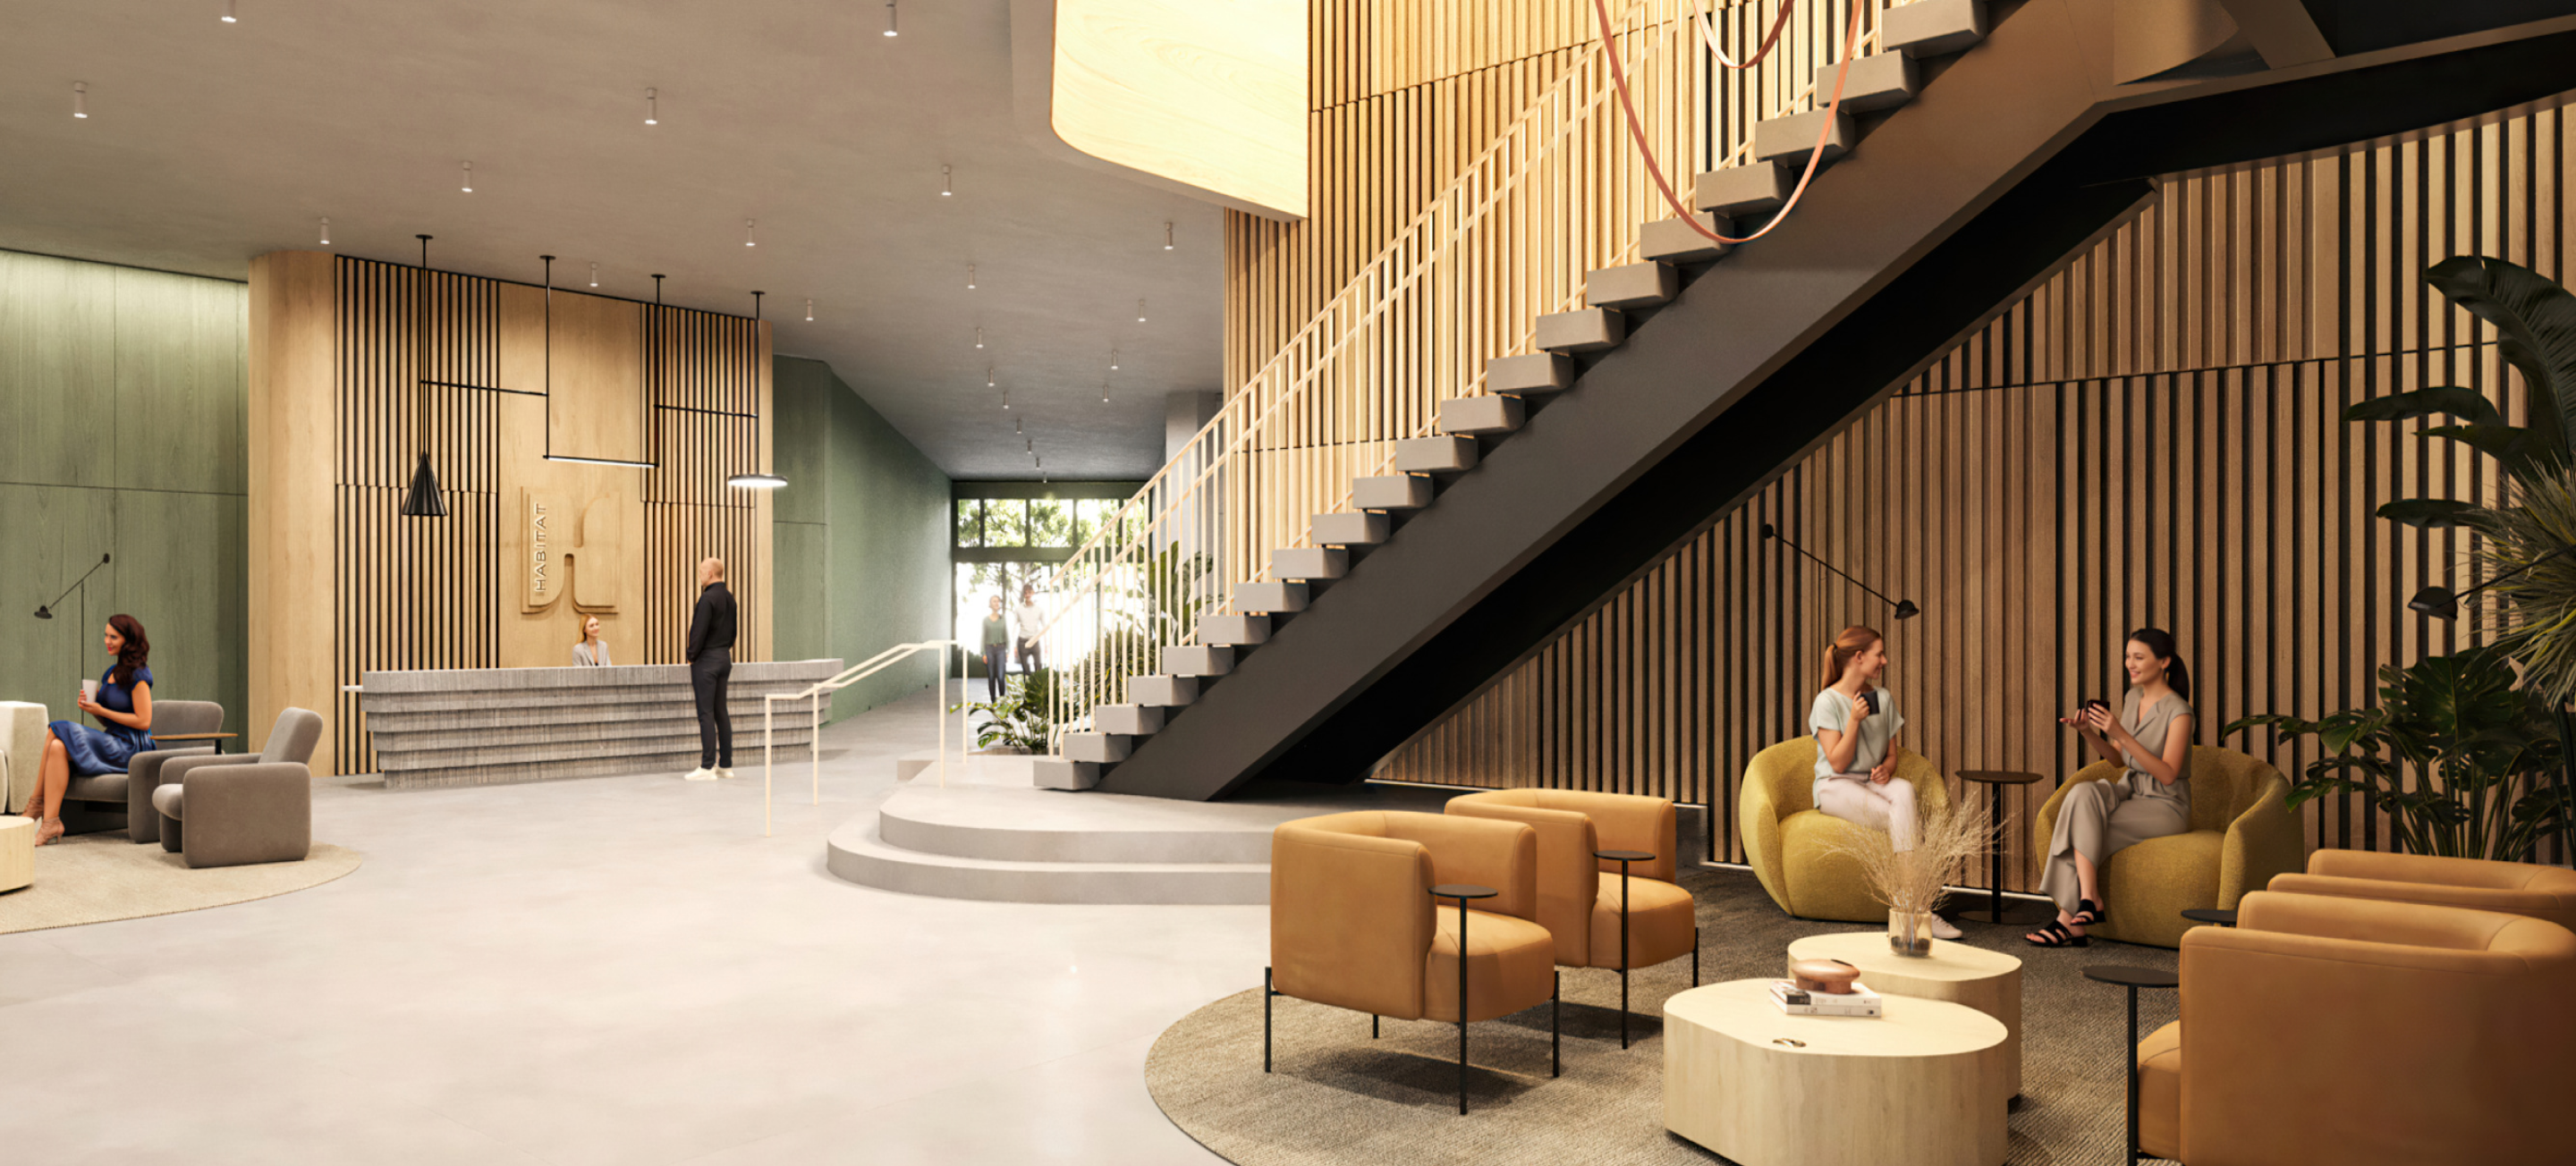 Habitat's large open lobby with wood details and an inviting staircase connecting to the second level Habitat's inviting park setting along the expo line bikeway and light rail